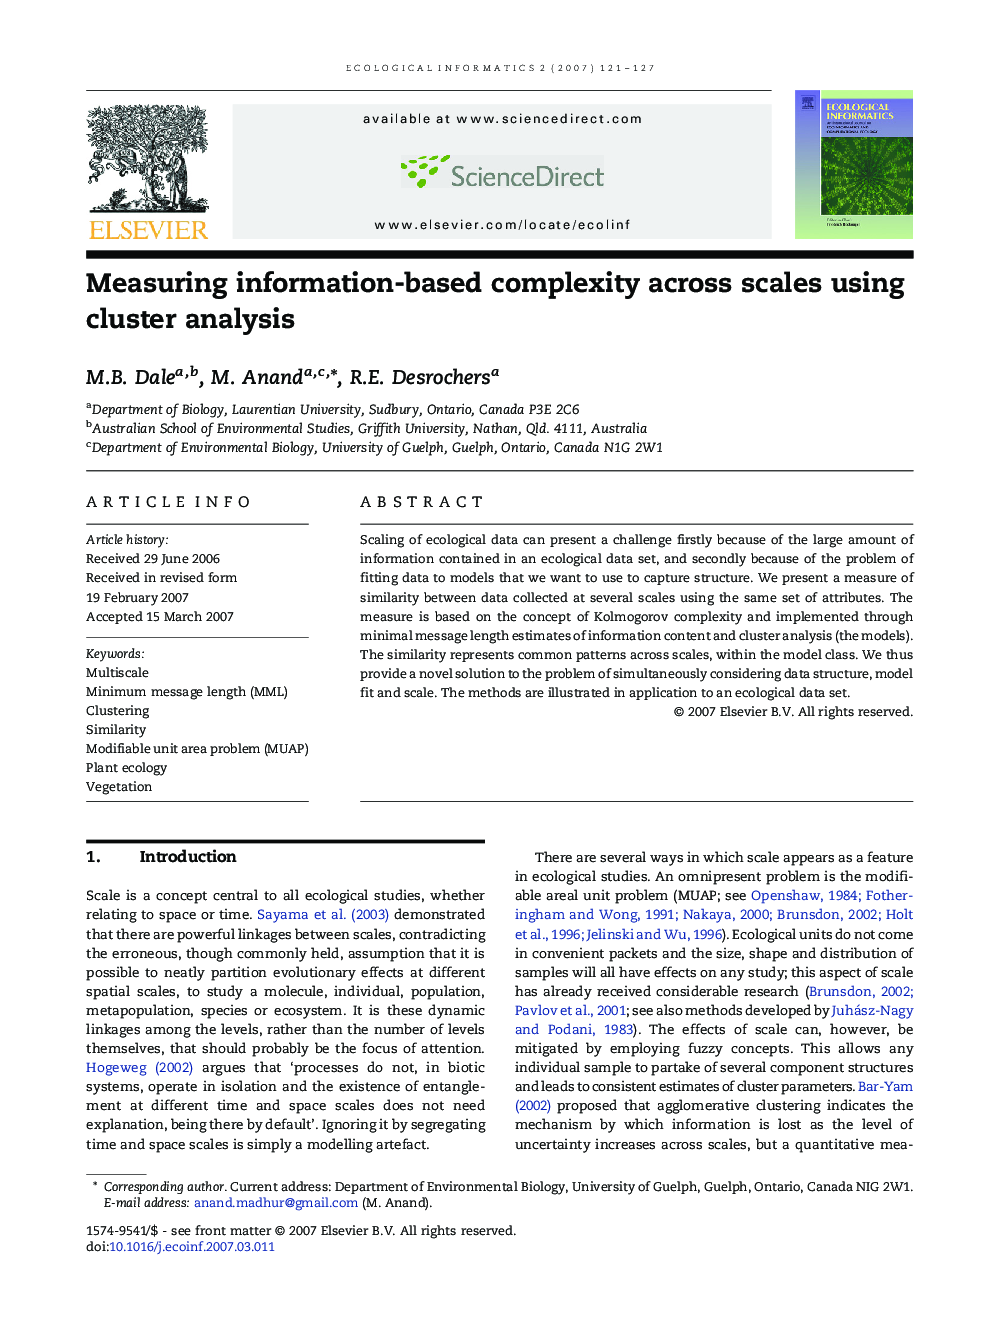 Measuring information-based complexity across scales using cluster analysis